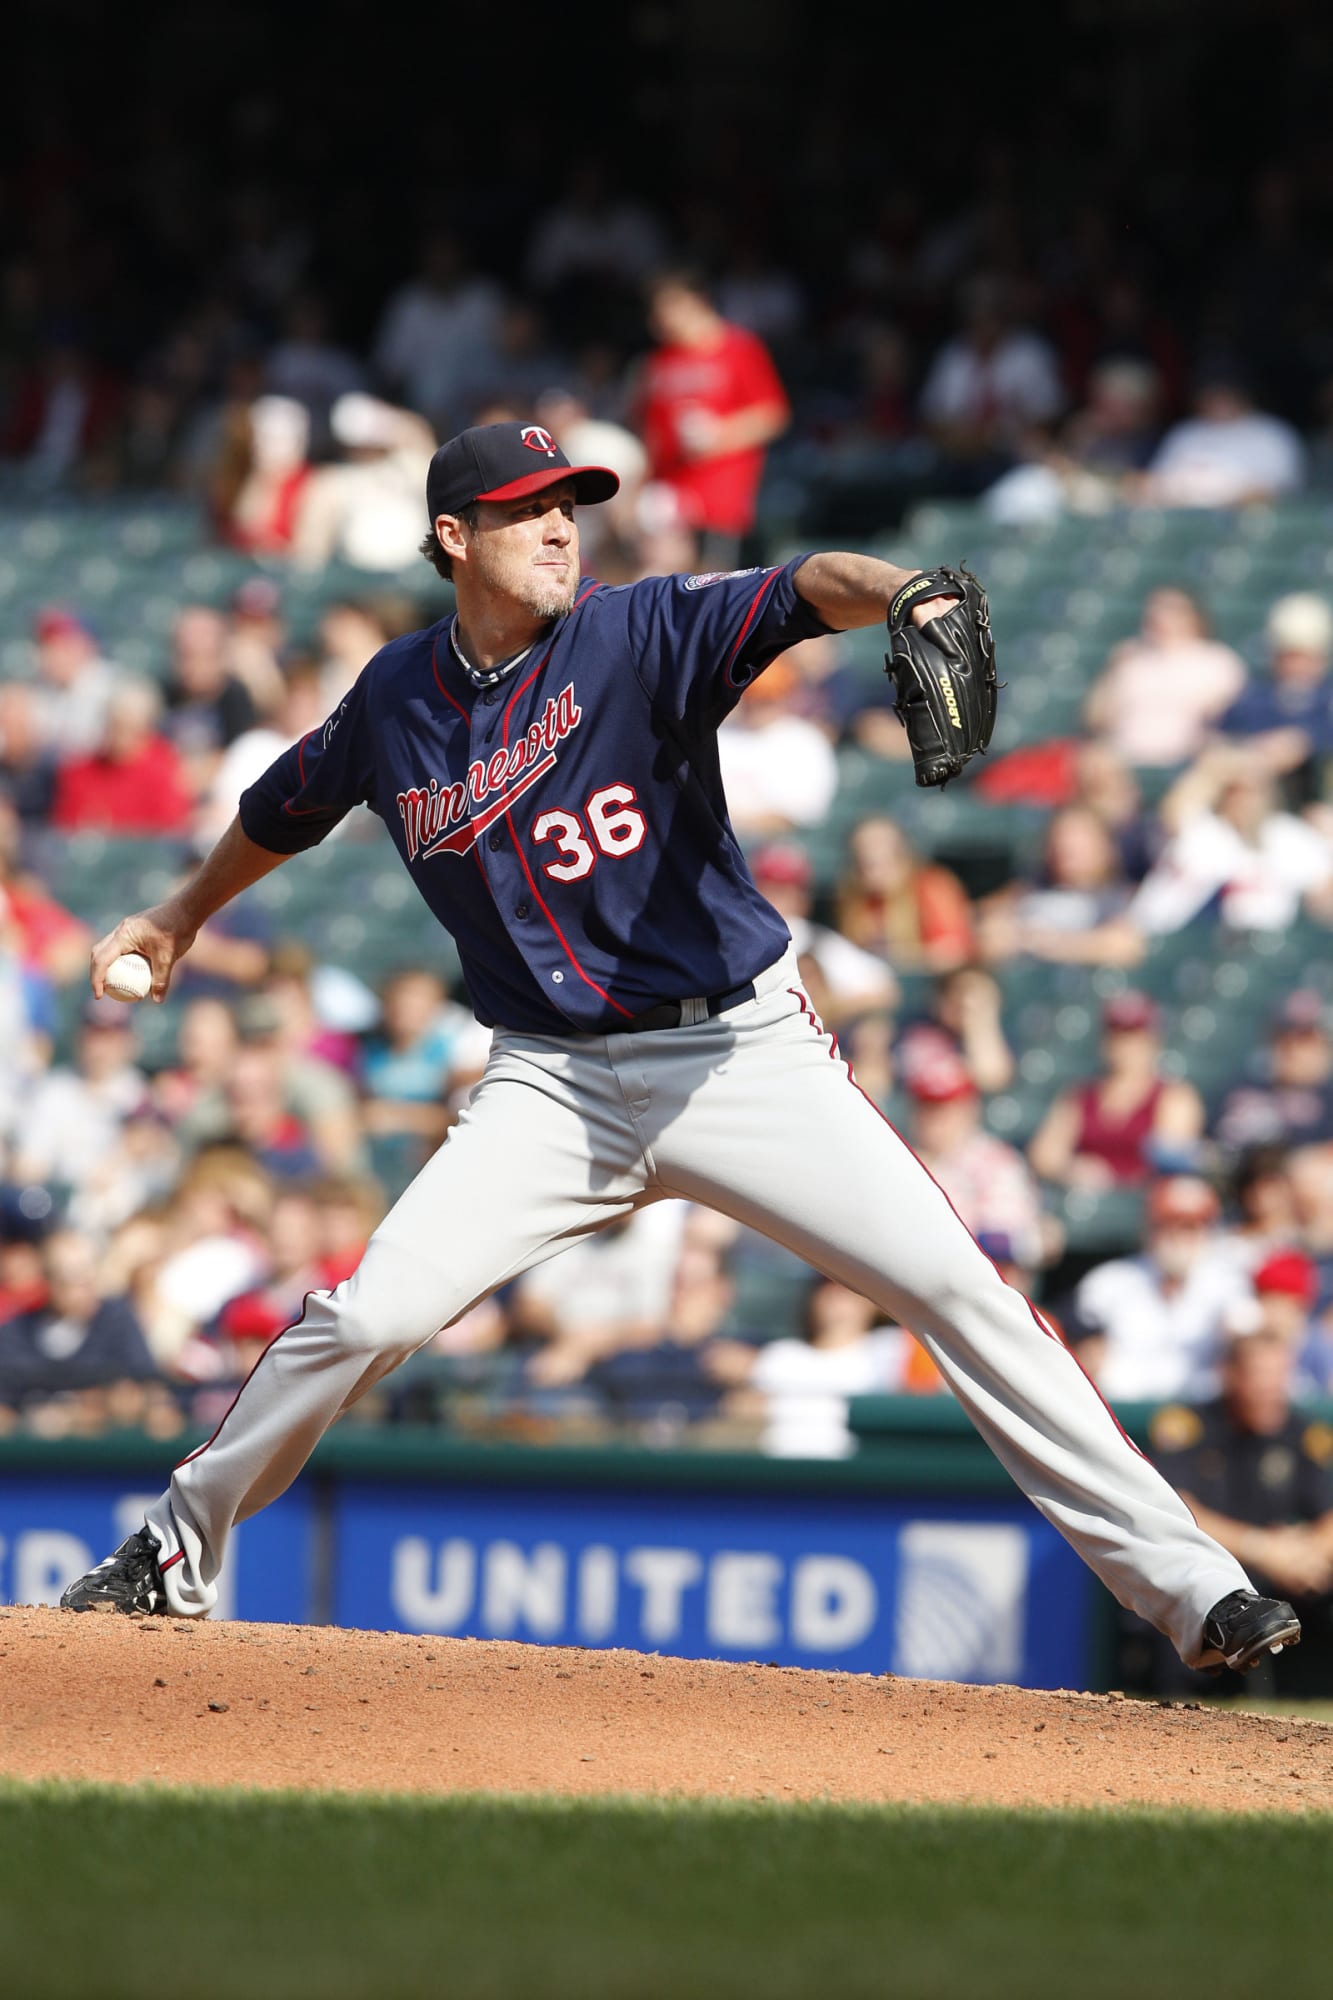 Minnesota Twins The Top 5 Relief Pitchers in Franchise History